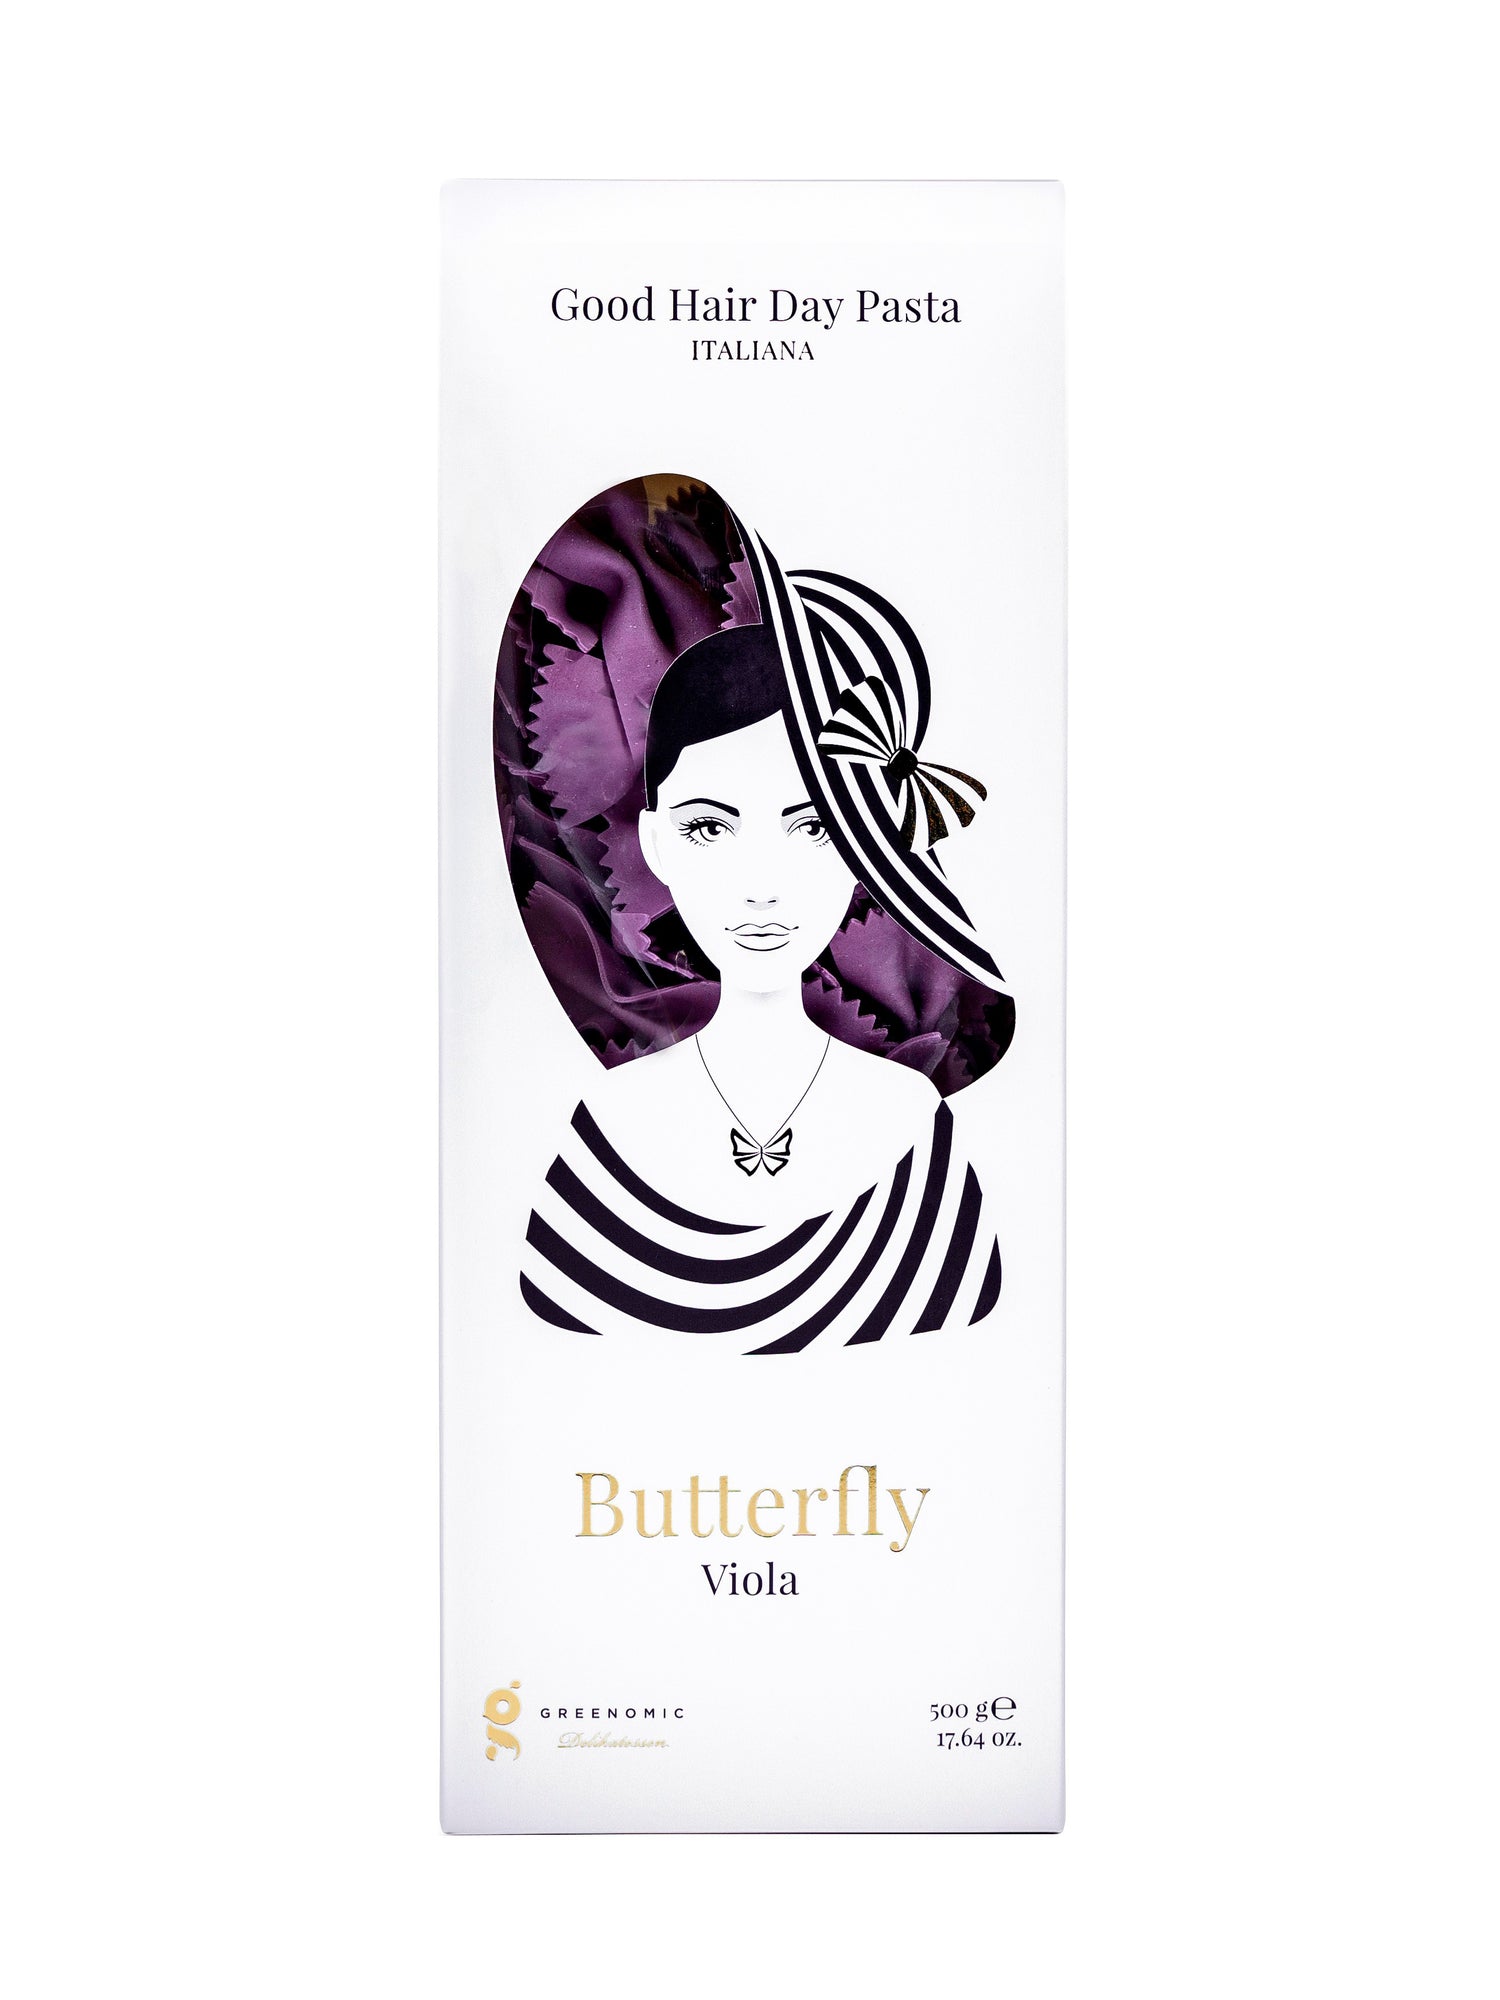 Good Hair Day Pasta Butterfly, Viola